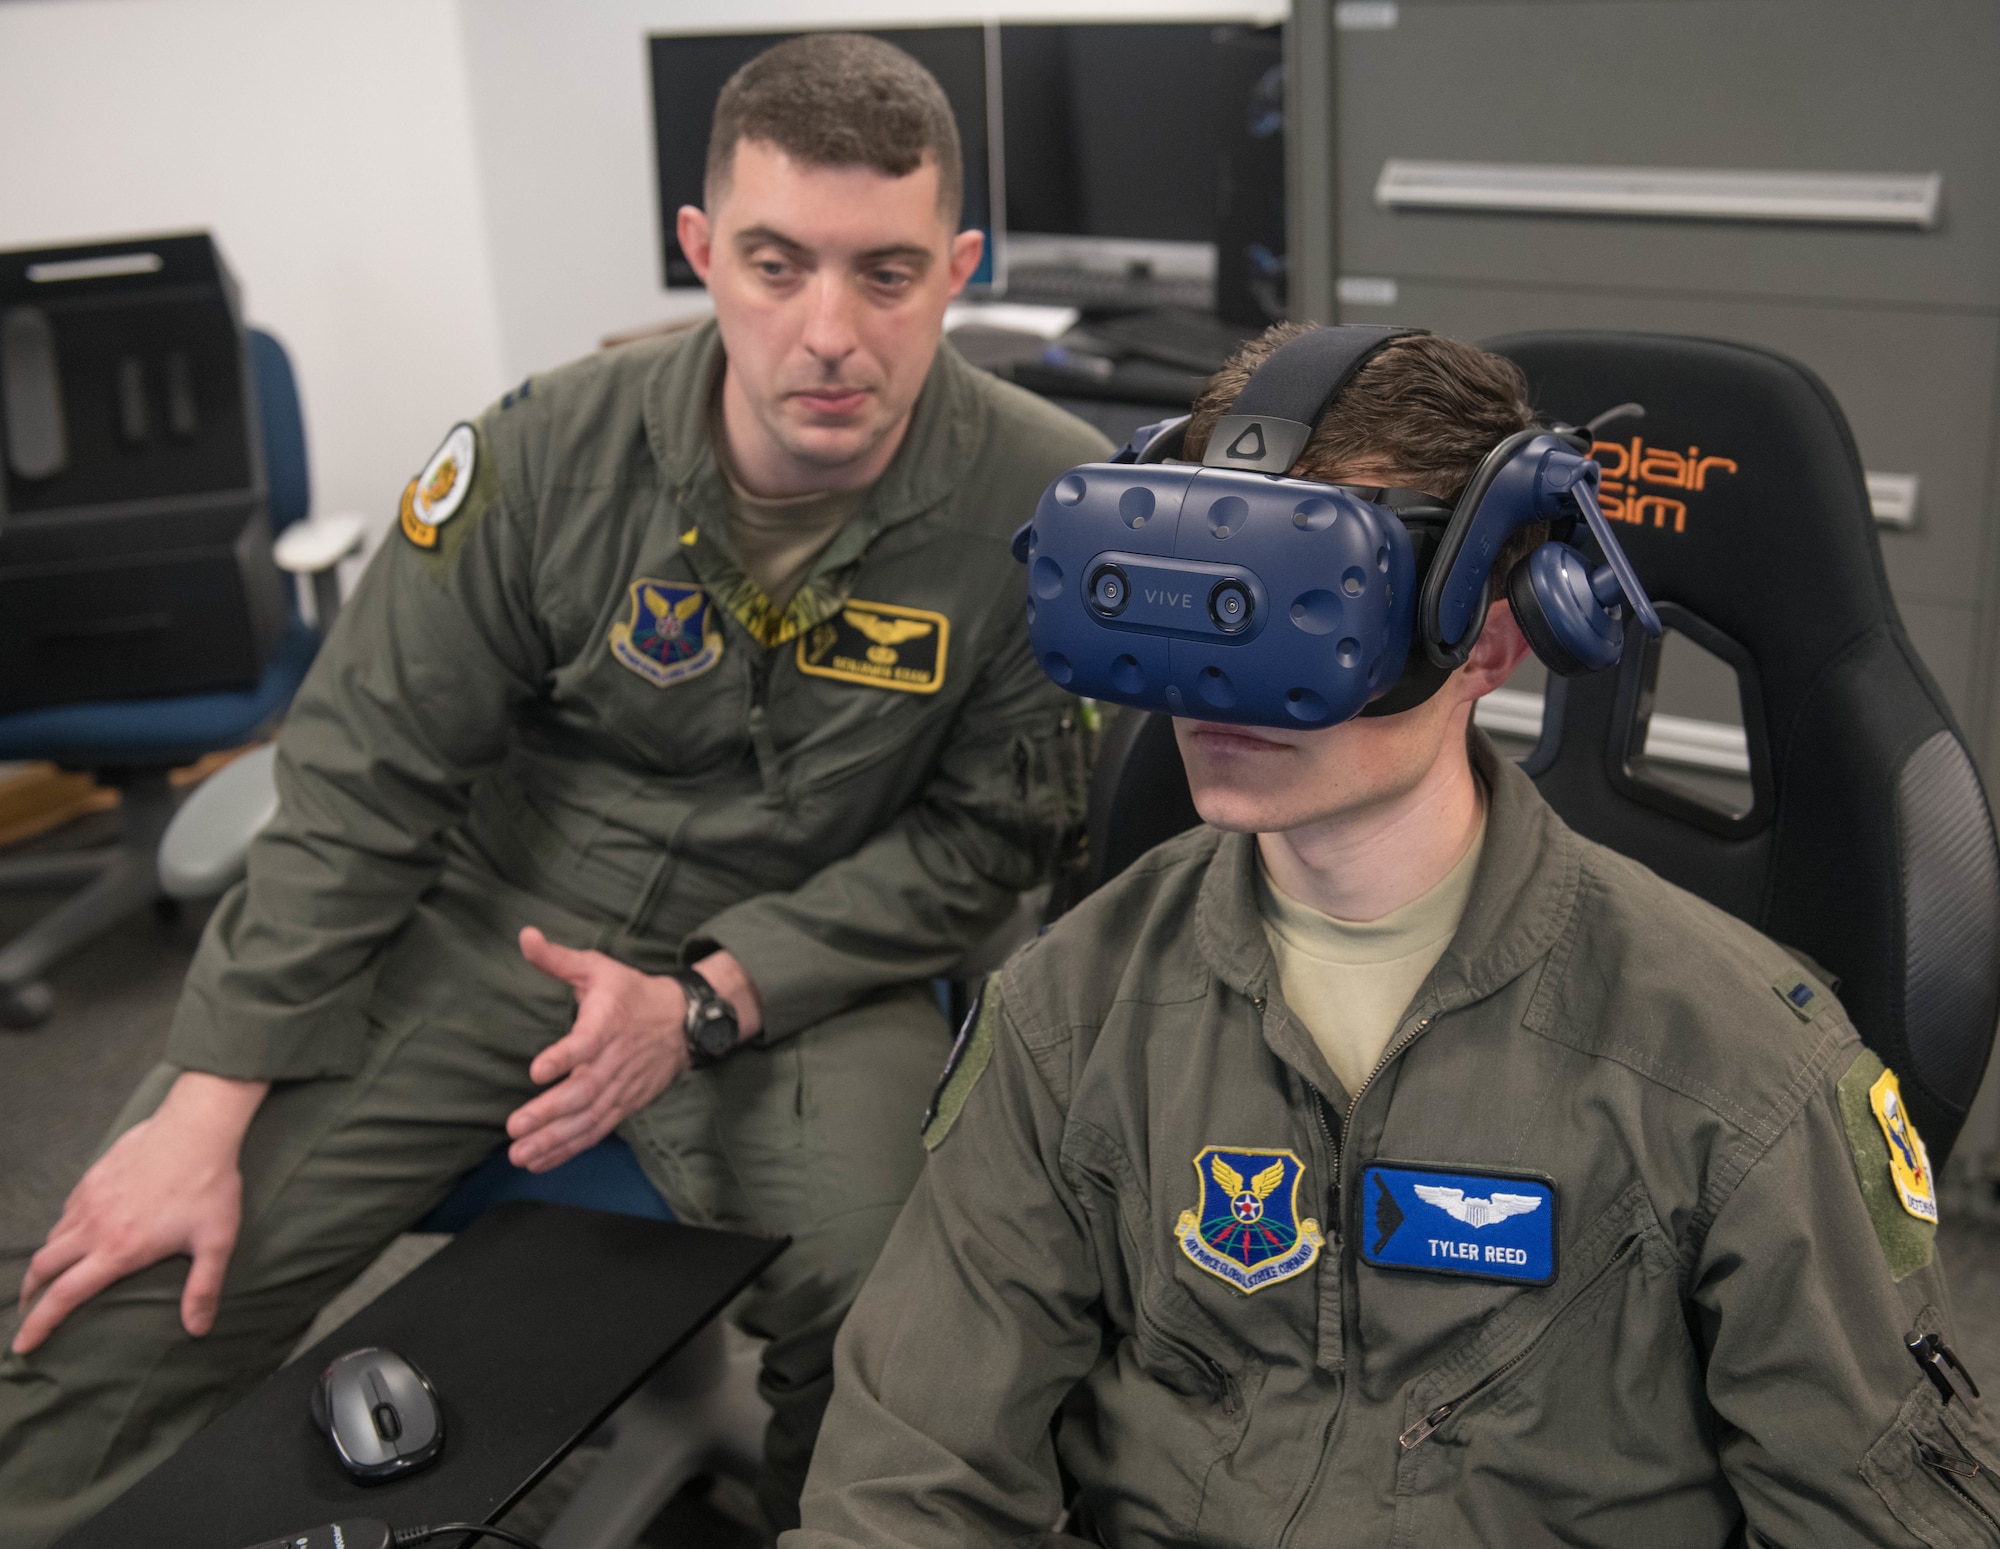 509th Bomb Wing Innovation Director, U.S. Air Force Capt. Benjamin Kram (Left), instructs 13th Bomb Squadron T-38A Trainer Instructor Pilot, U.S. Air Force 1st Lt. Tyler Reed, on how to operate the T-38 Virtual Reality simulator at Whiteman Air Force Base, Missouri, June 24, 2020. VR technology allows pilots to train on specific aircraft to gain exposure and experience. (U.S. Air Force photo by Senior Airman Thomas Johns)